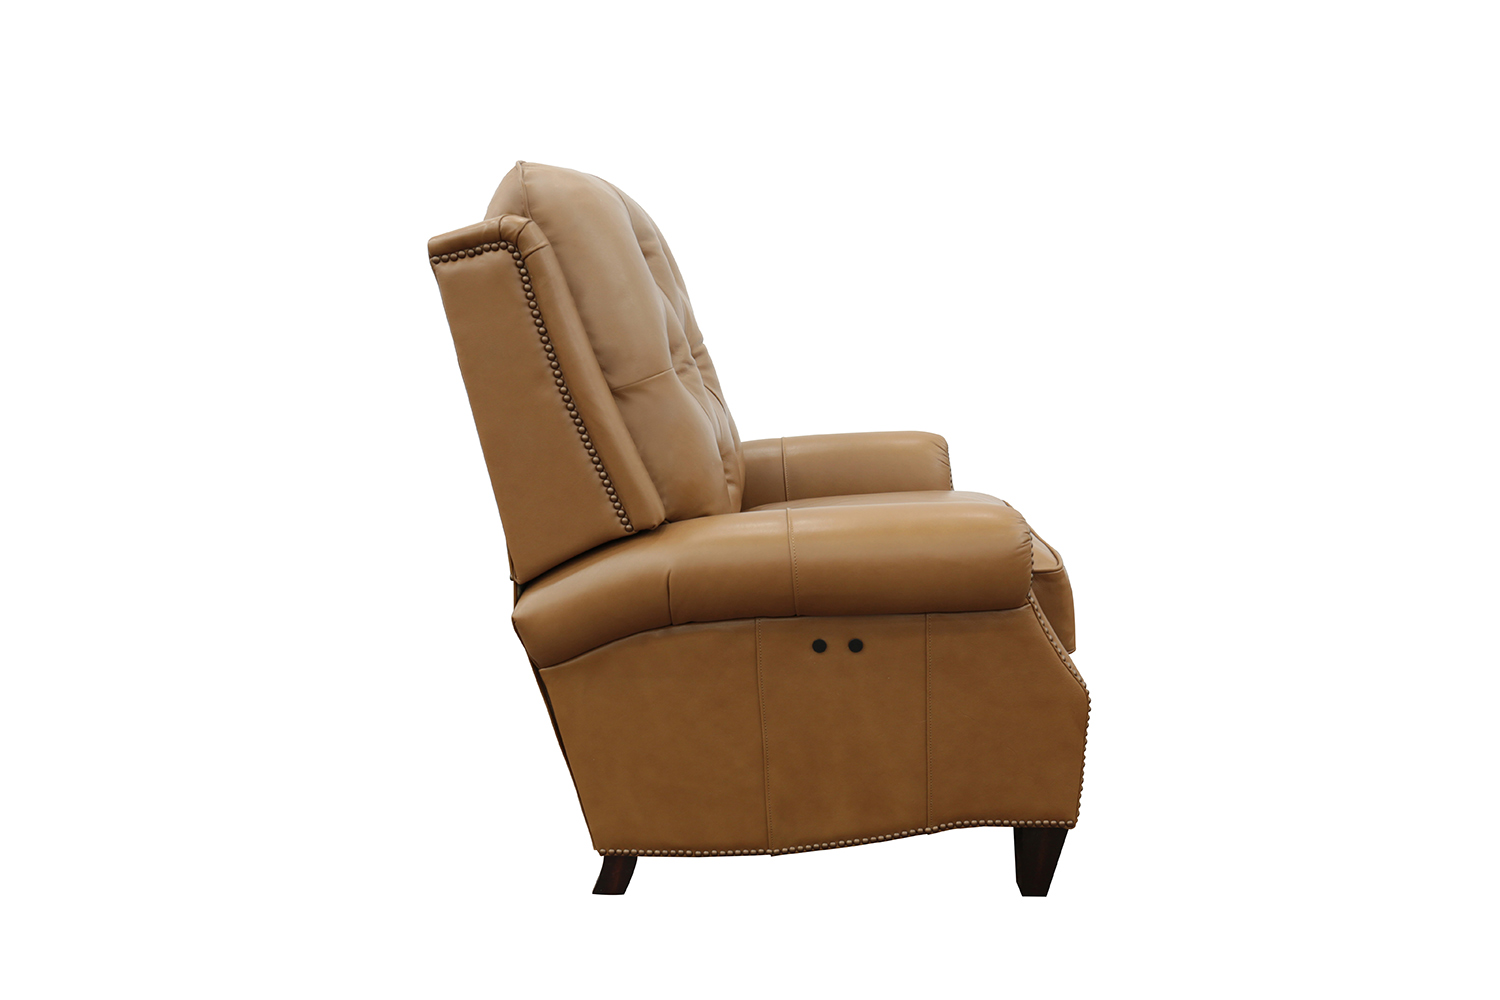 Barcalounger Ava Power Recliner Chair - Shoreham Ponytail/All Leather